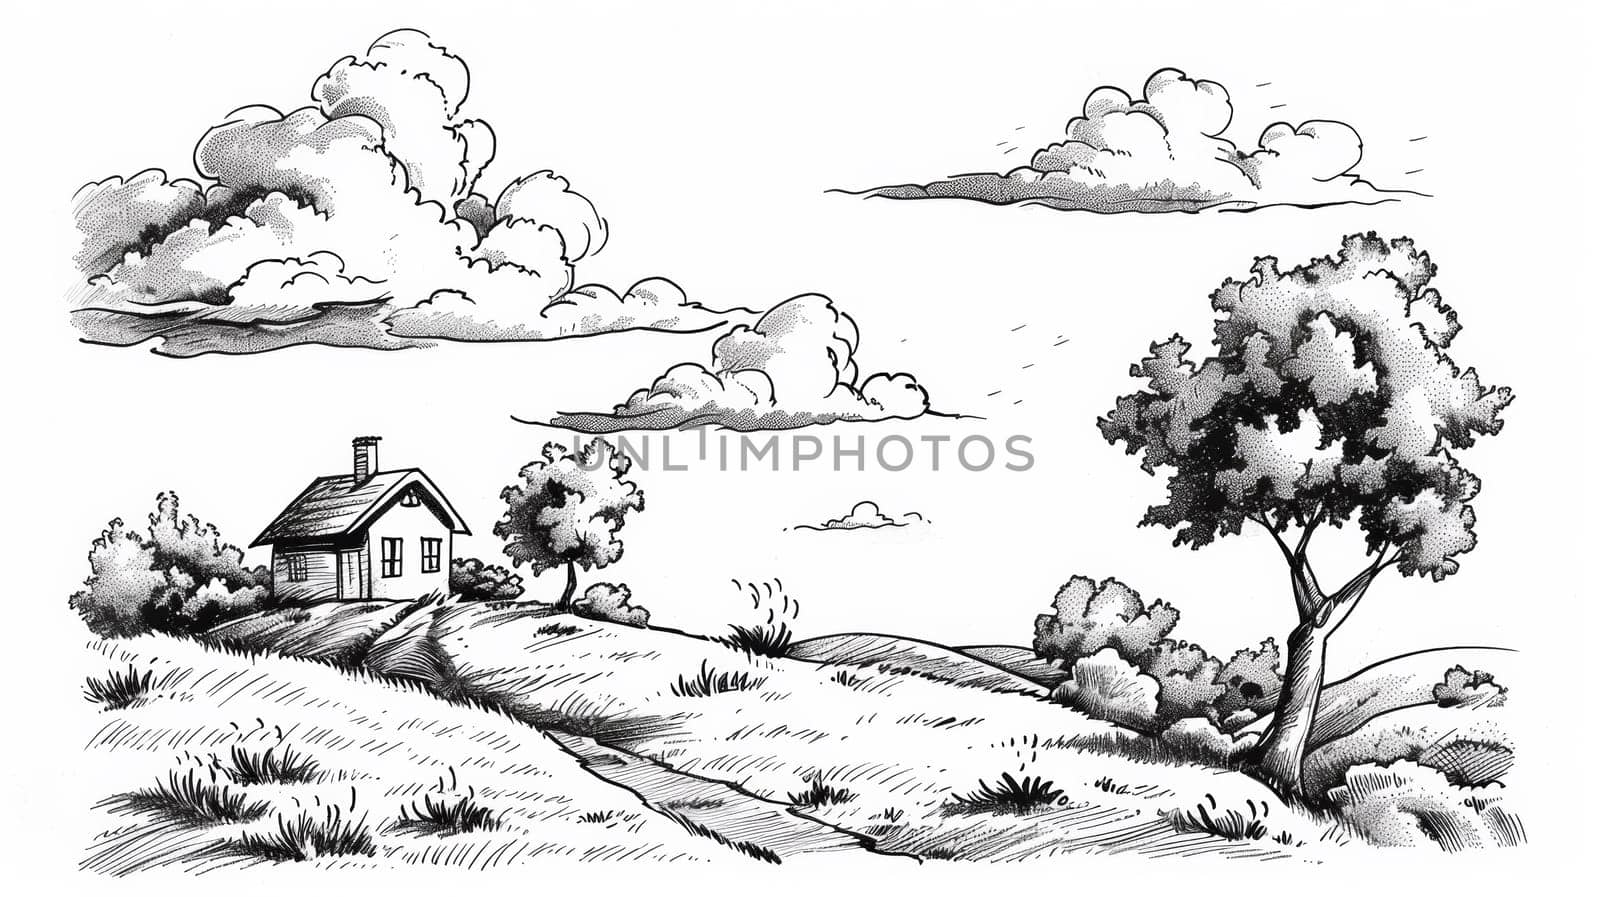 A drawing of a house on the hill with clouds in the sky